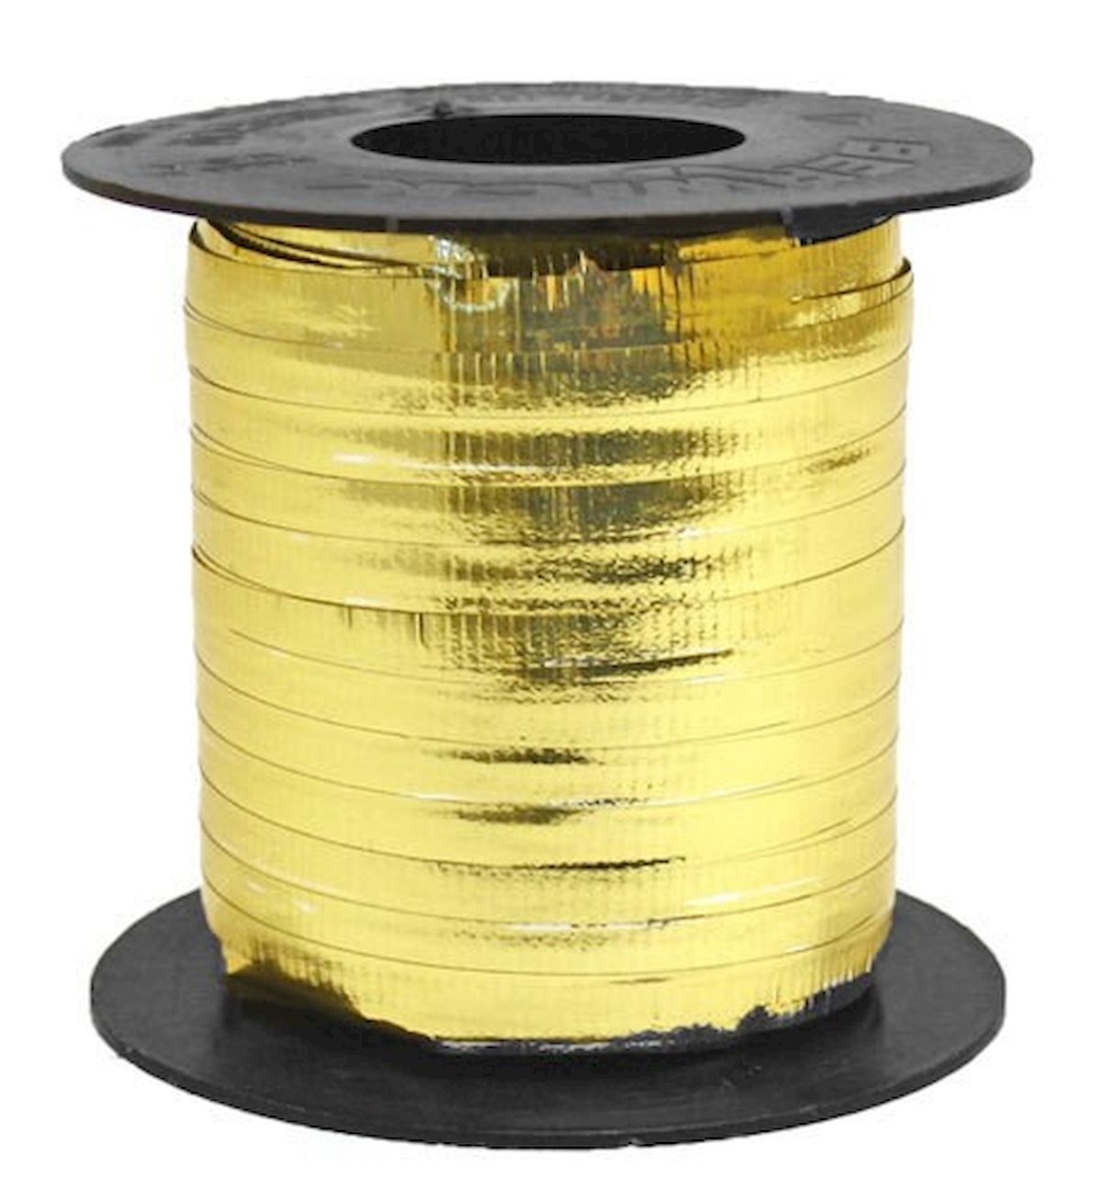 Picture of Mr. MJs Trading AI-5106 0.19 in. x 250 Yards Metallic Gold Curling Crimped Ribbon